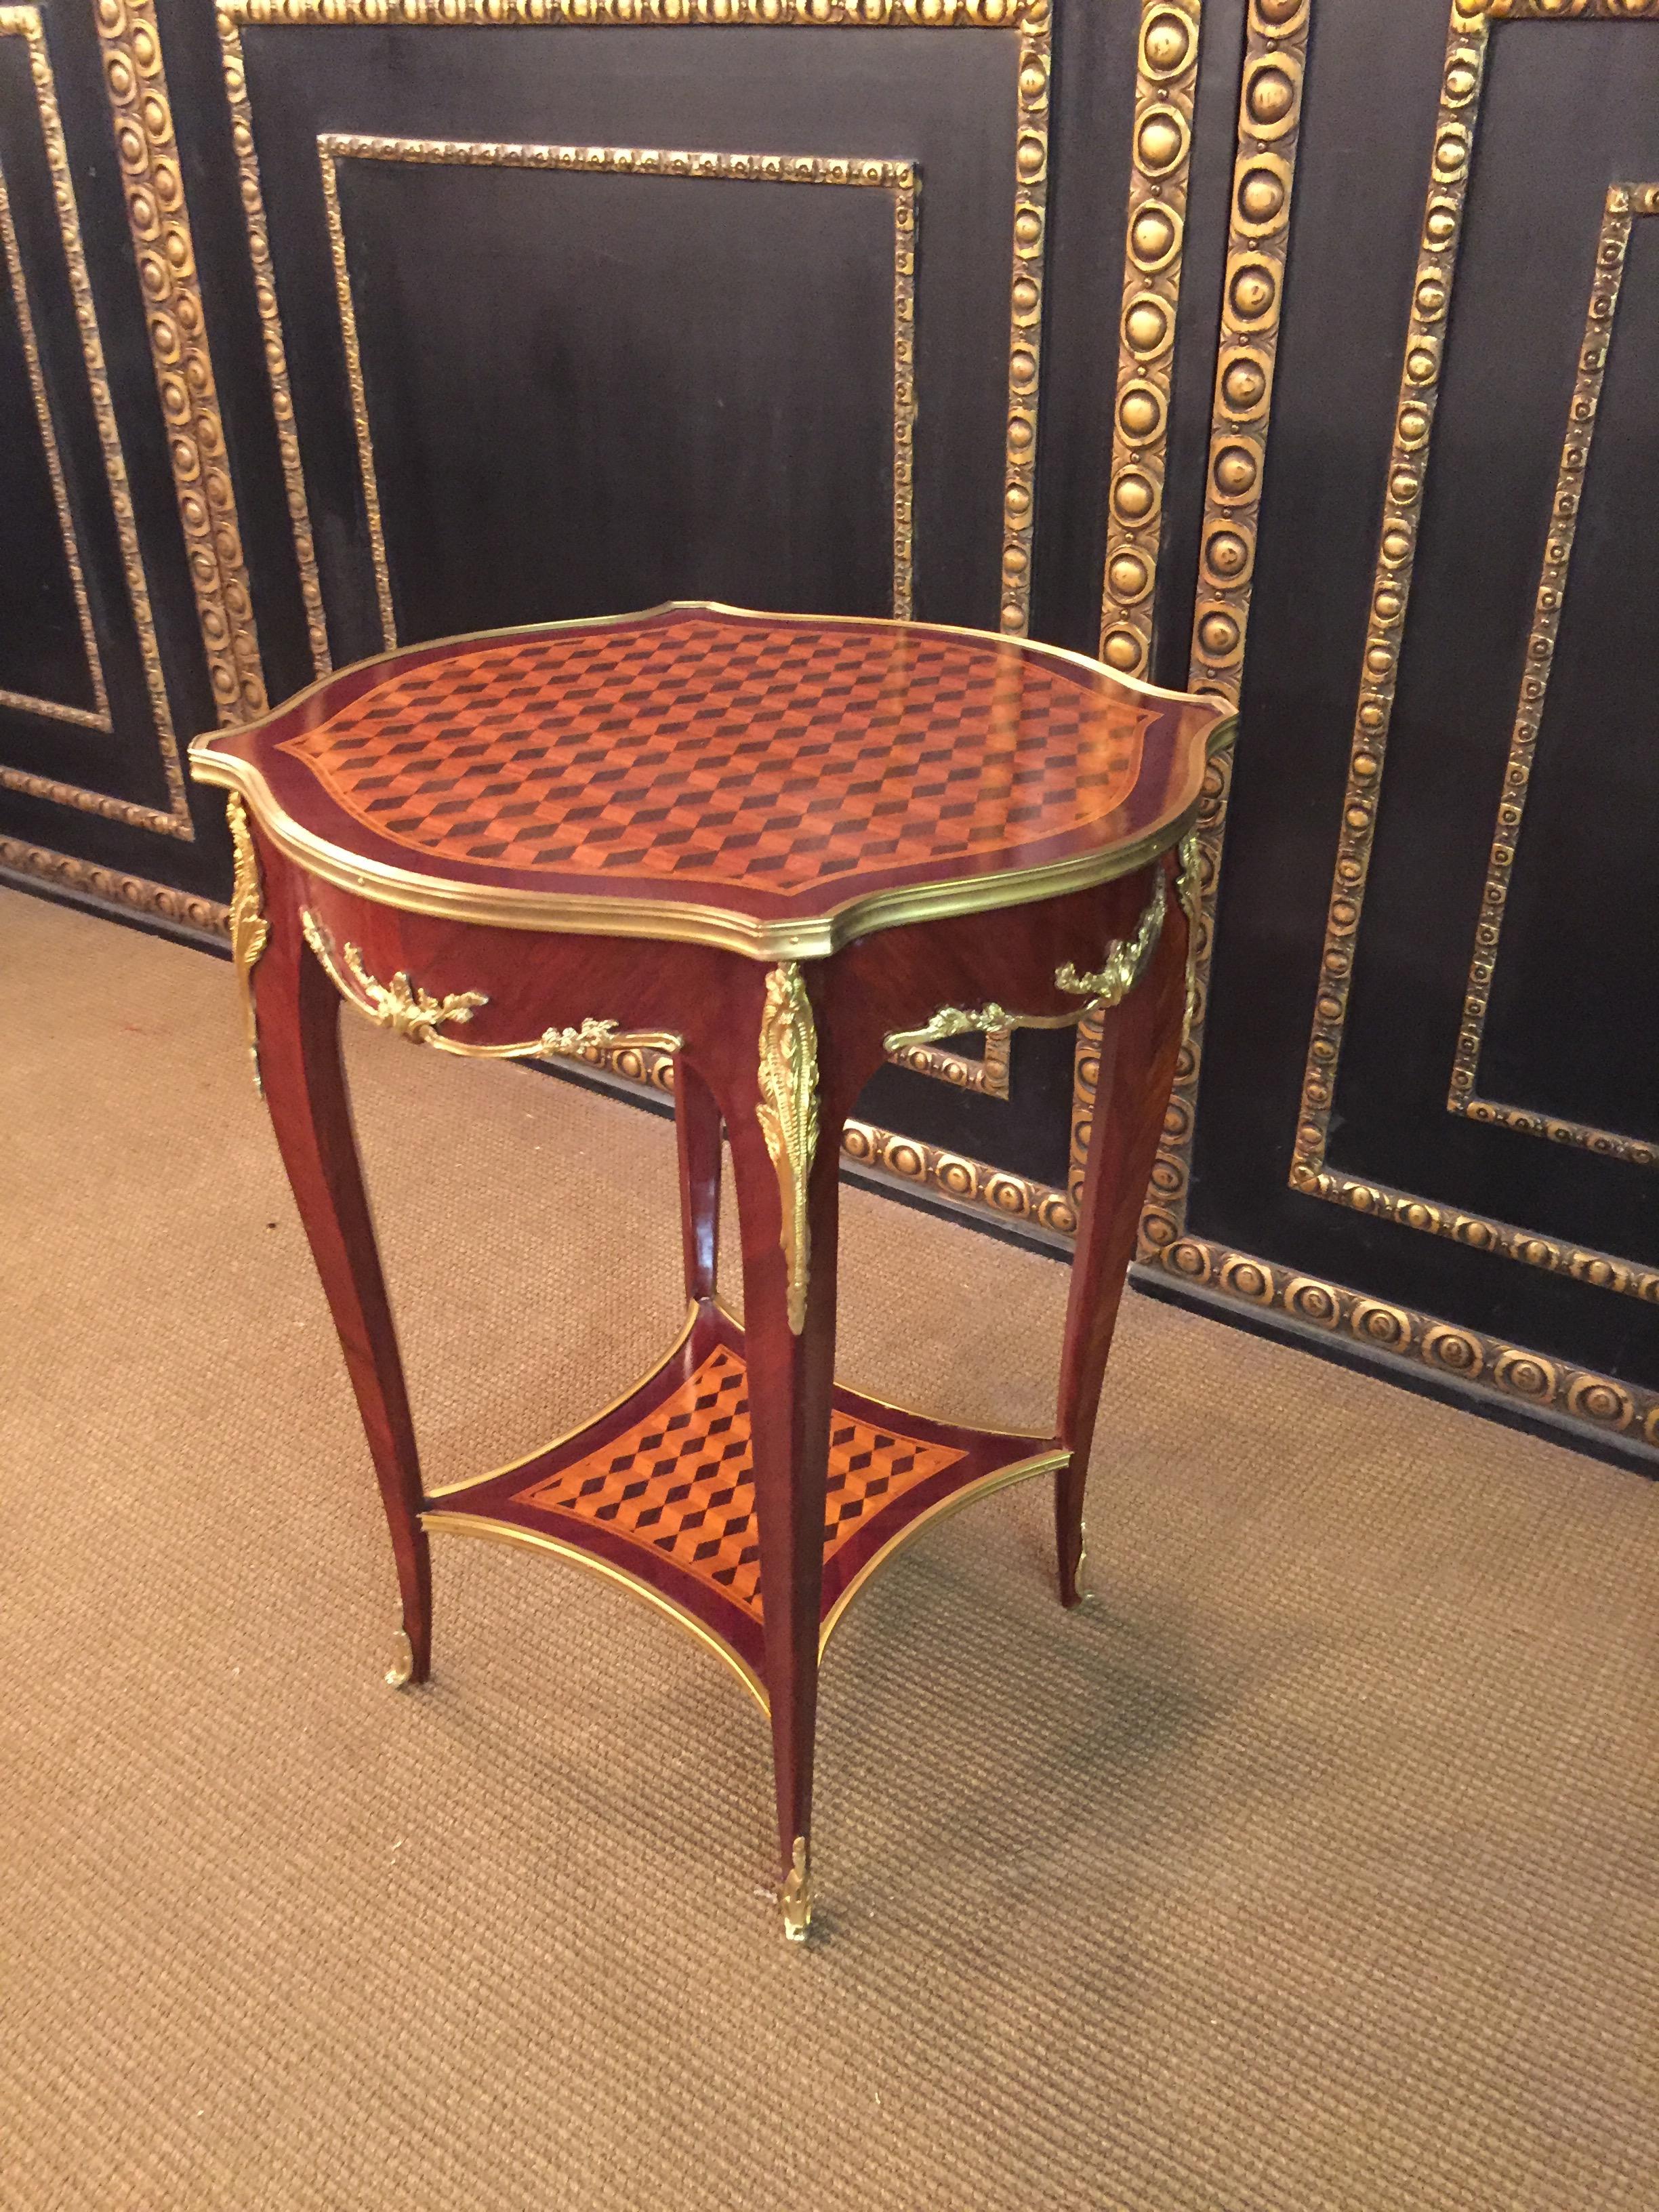 Rosewood on solid beech with inlays, slightly convex and concave, carcass, flanked by extended corner strips on high, elegantly curved legs in ending with lower sabots.